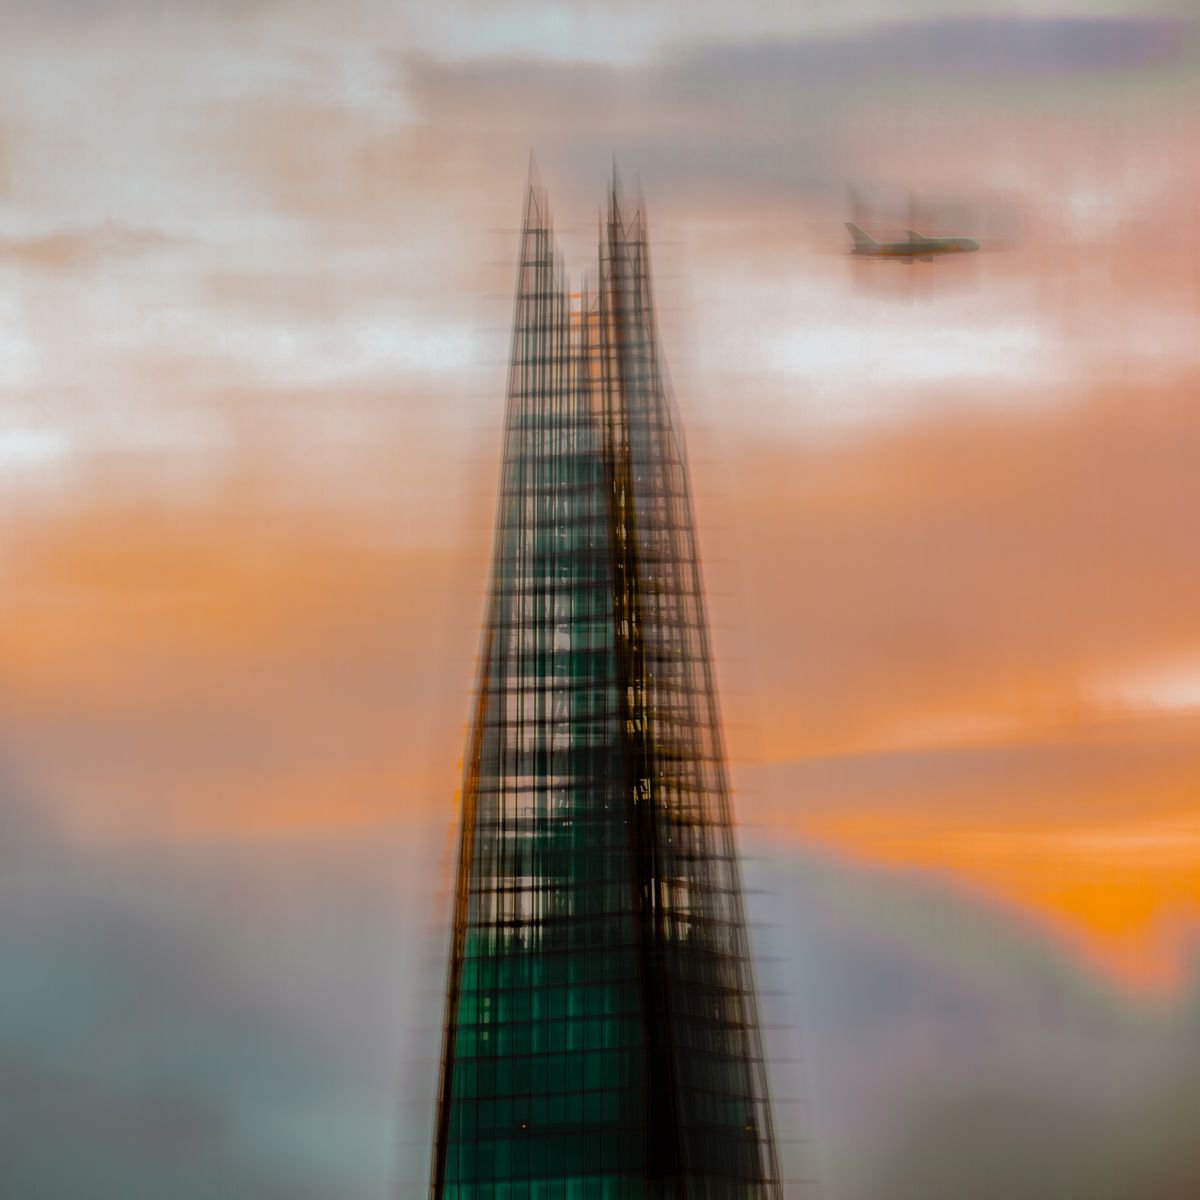 Linear London - The Shard and A Plane Limited Edition #1/50 10x10 inch Photographic Print. by Graham Briggs